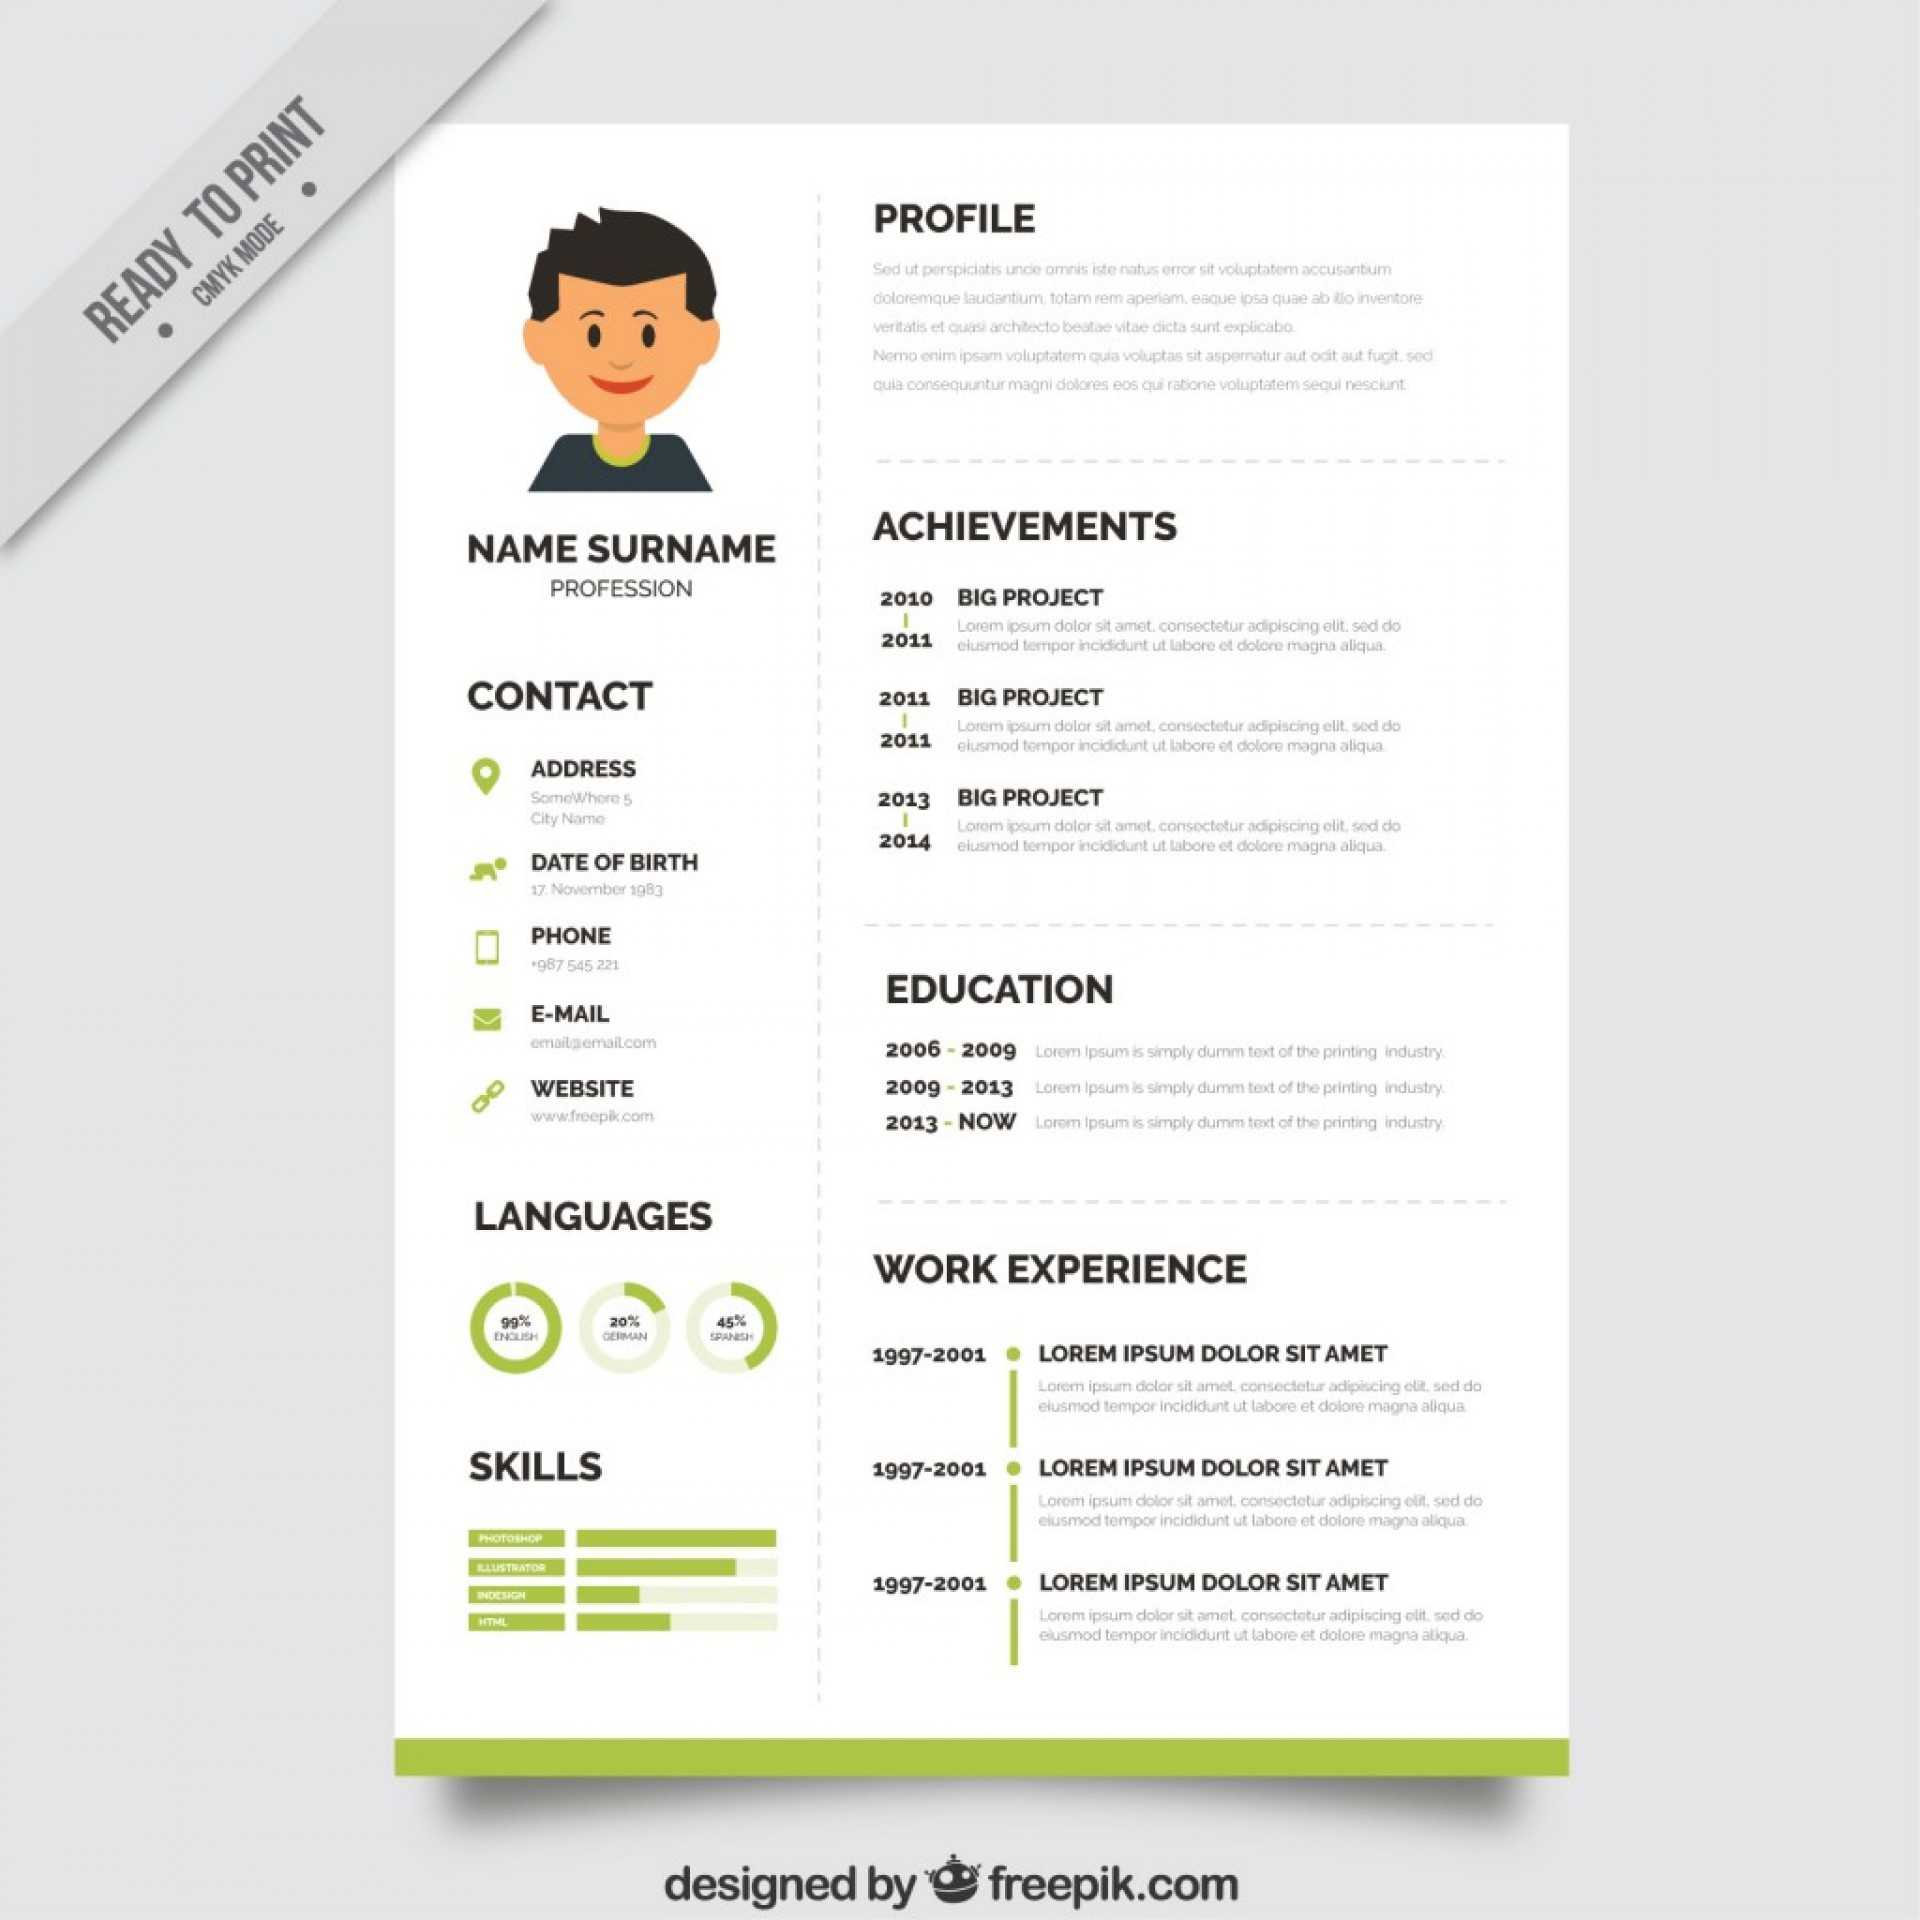 003 Template Ideas Free Resume 006 Downloadable Frightening Within Free Downloadable Resume Templates For Word